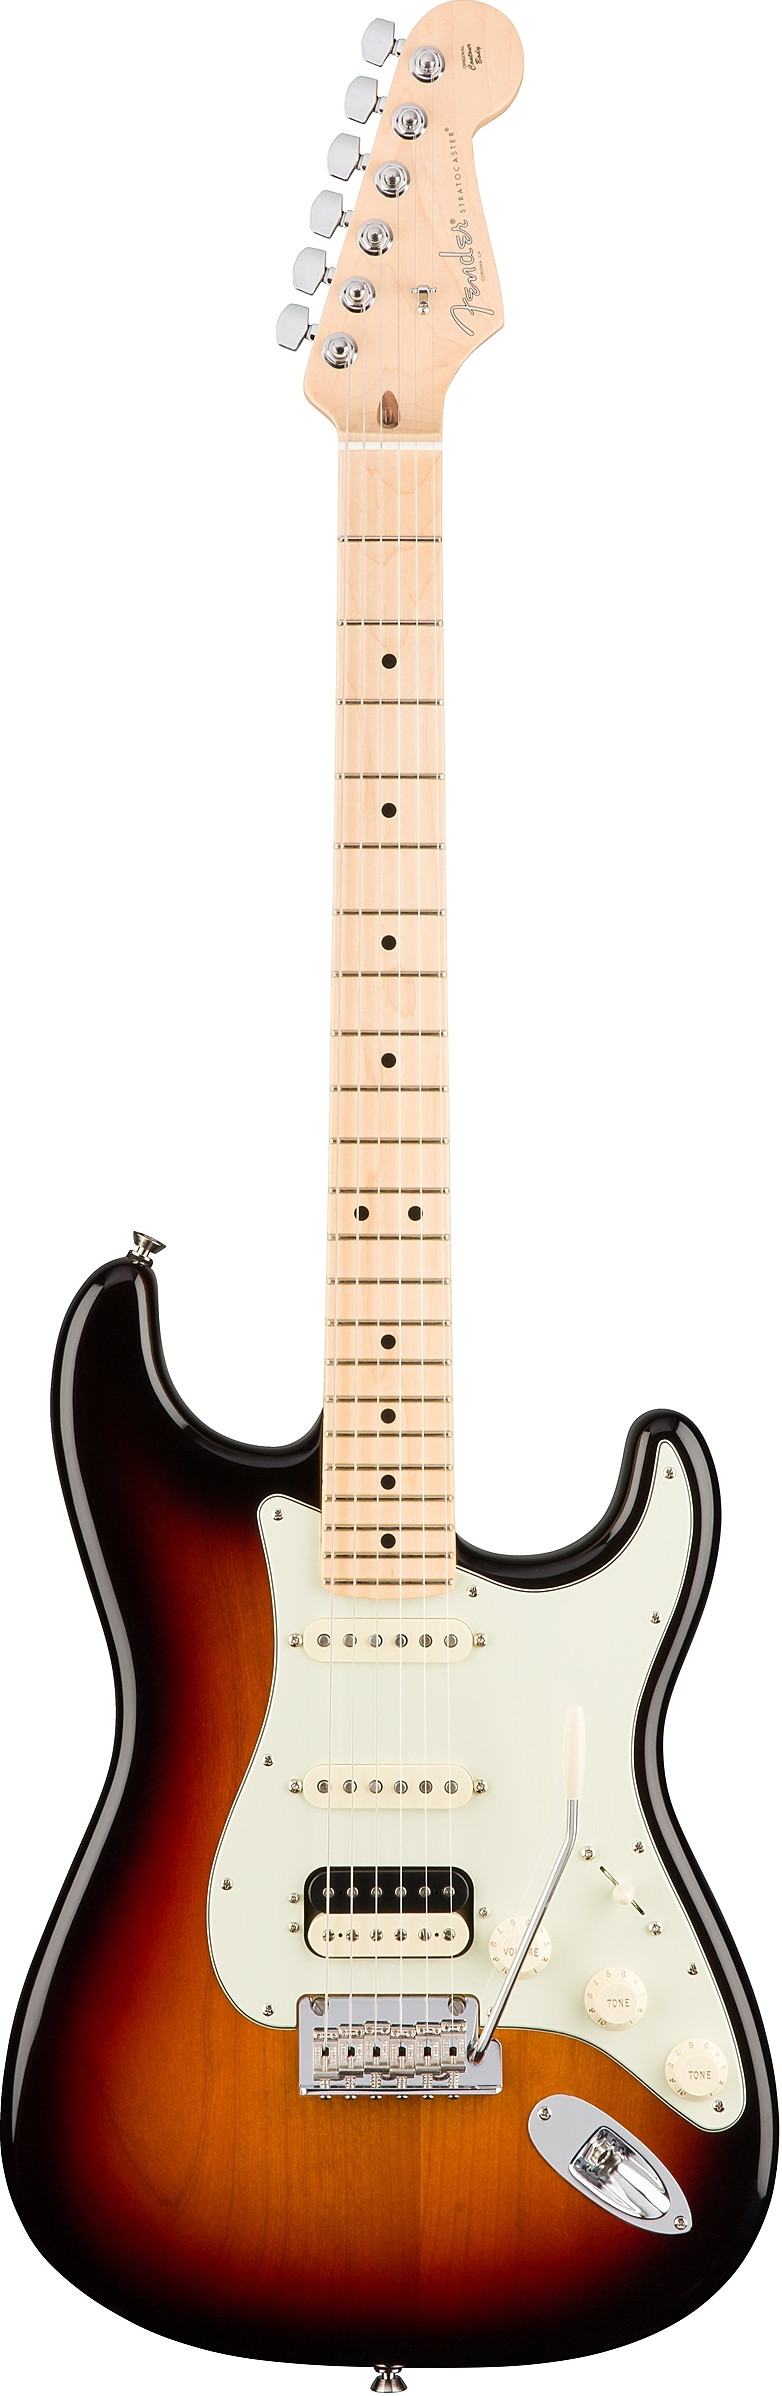 Fender American Professional Stratocaster HSS Shawbucker Review 